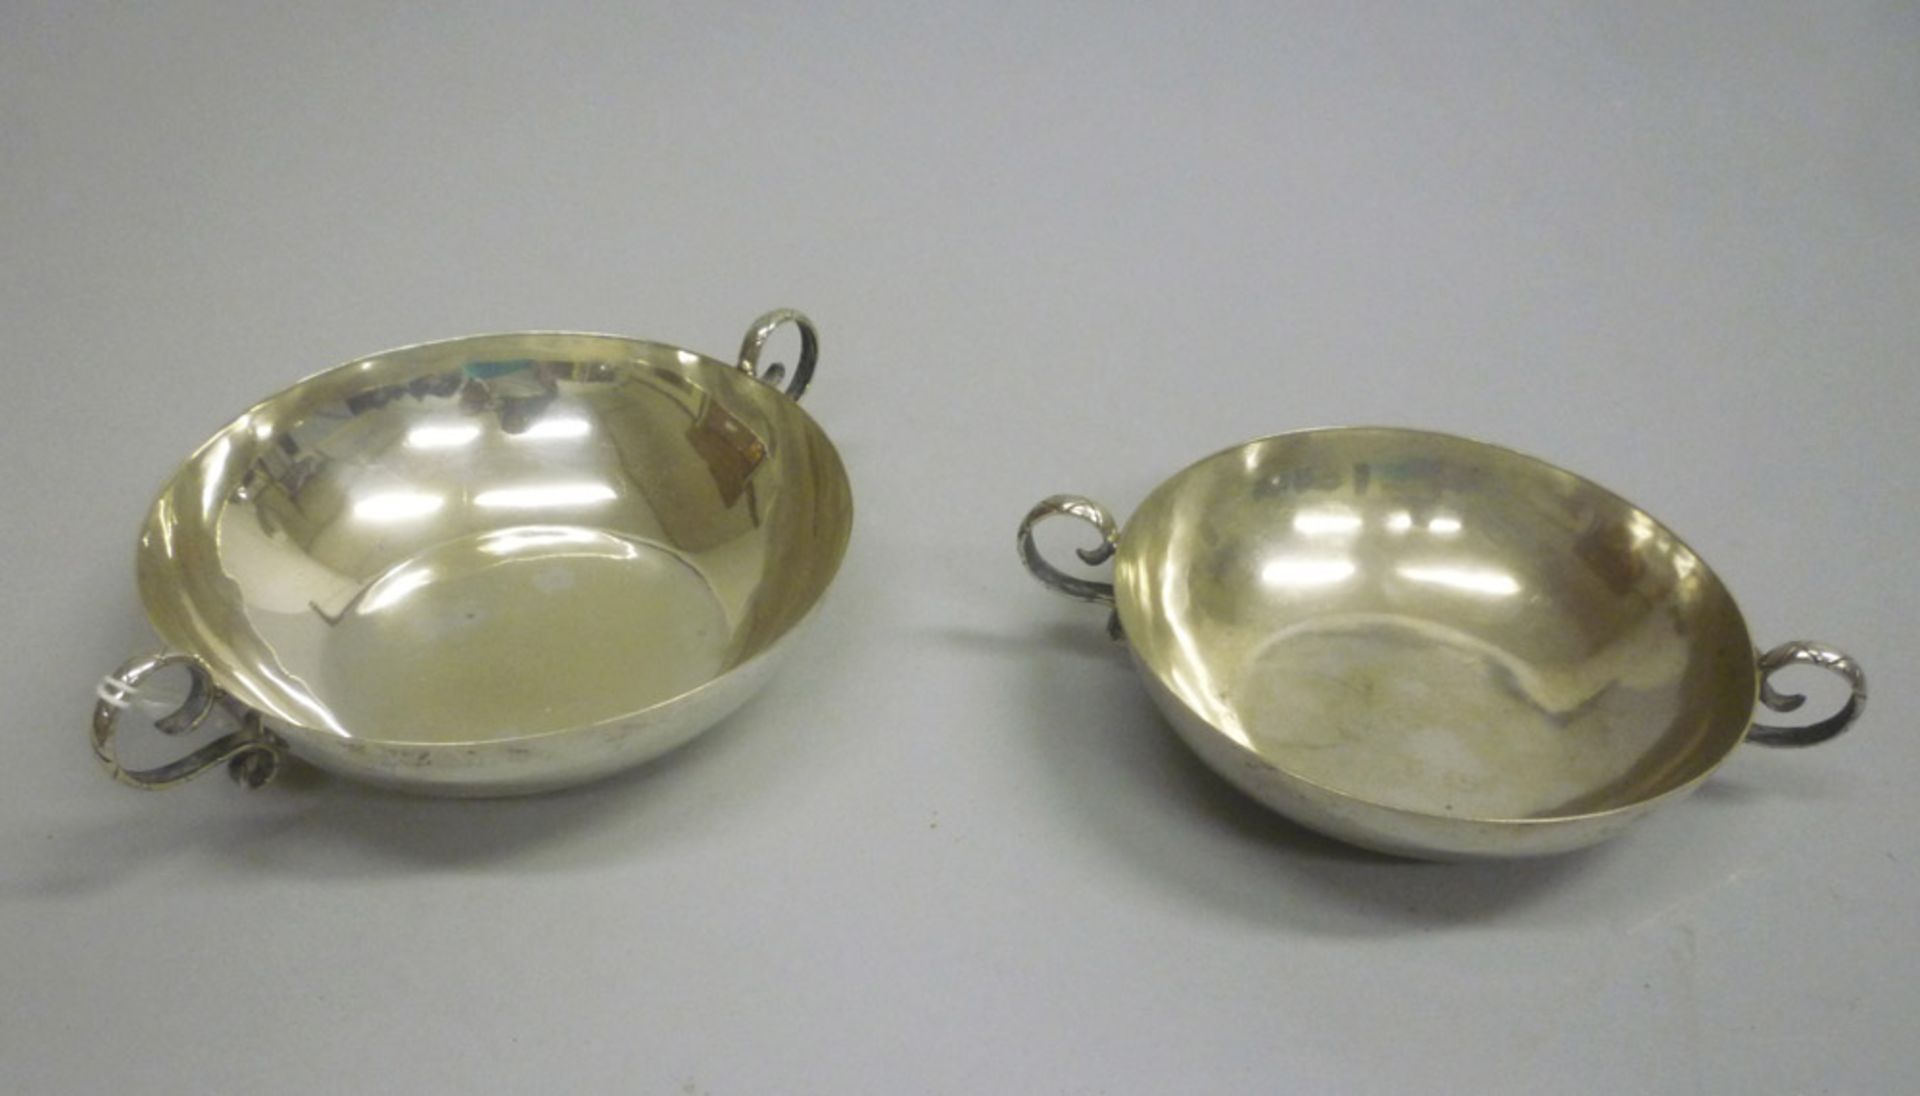 Two silver wine-tester, 20th century. Measures cm. 4 x 19 x 13,5 and cm. 3,5 x 16 x 12. General